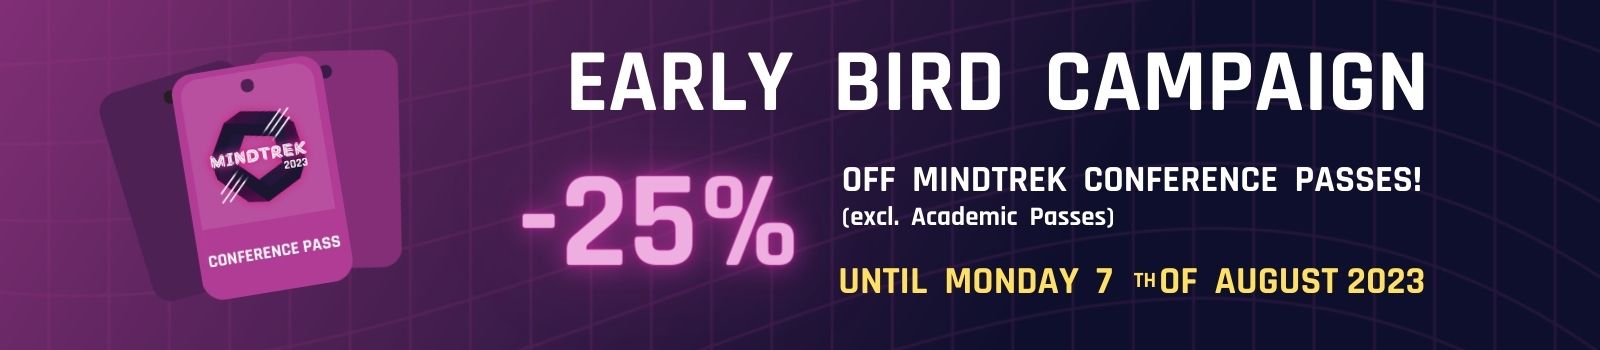 Early Bird Campaign